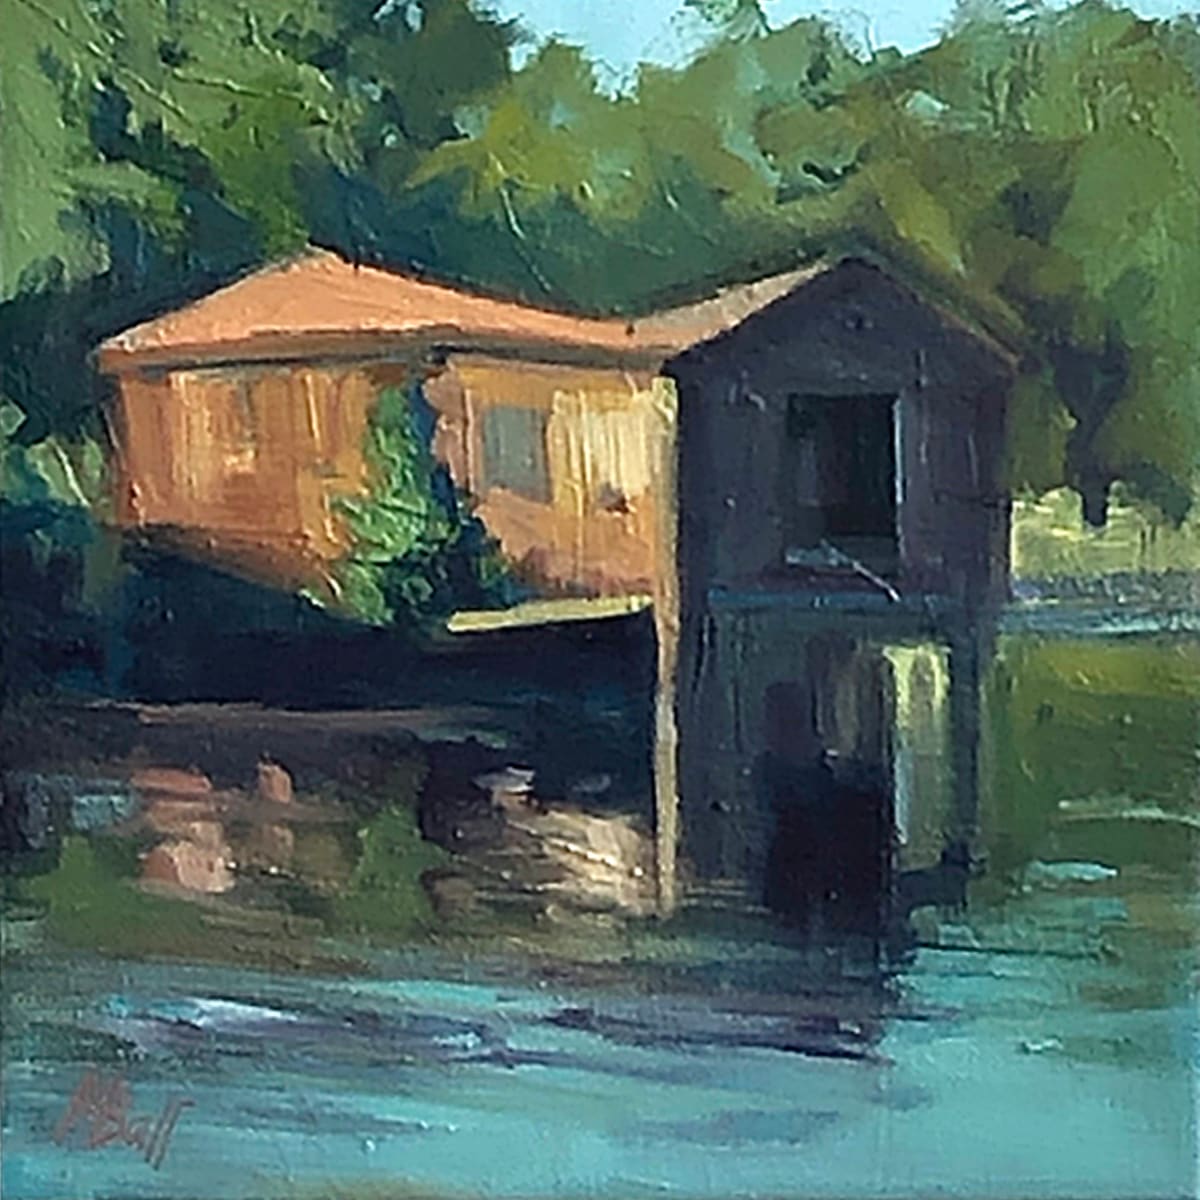 Fishing Shack I by Marjorie Ball  Image: I wish I knew the story of this old, dilapidated building on the cove in Apponaug. It feels like it is posing for our plein air session. 